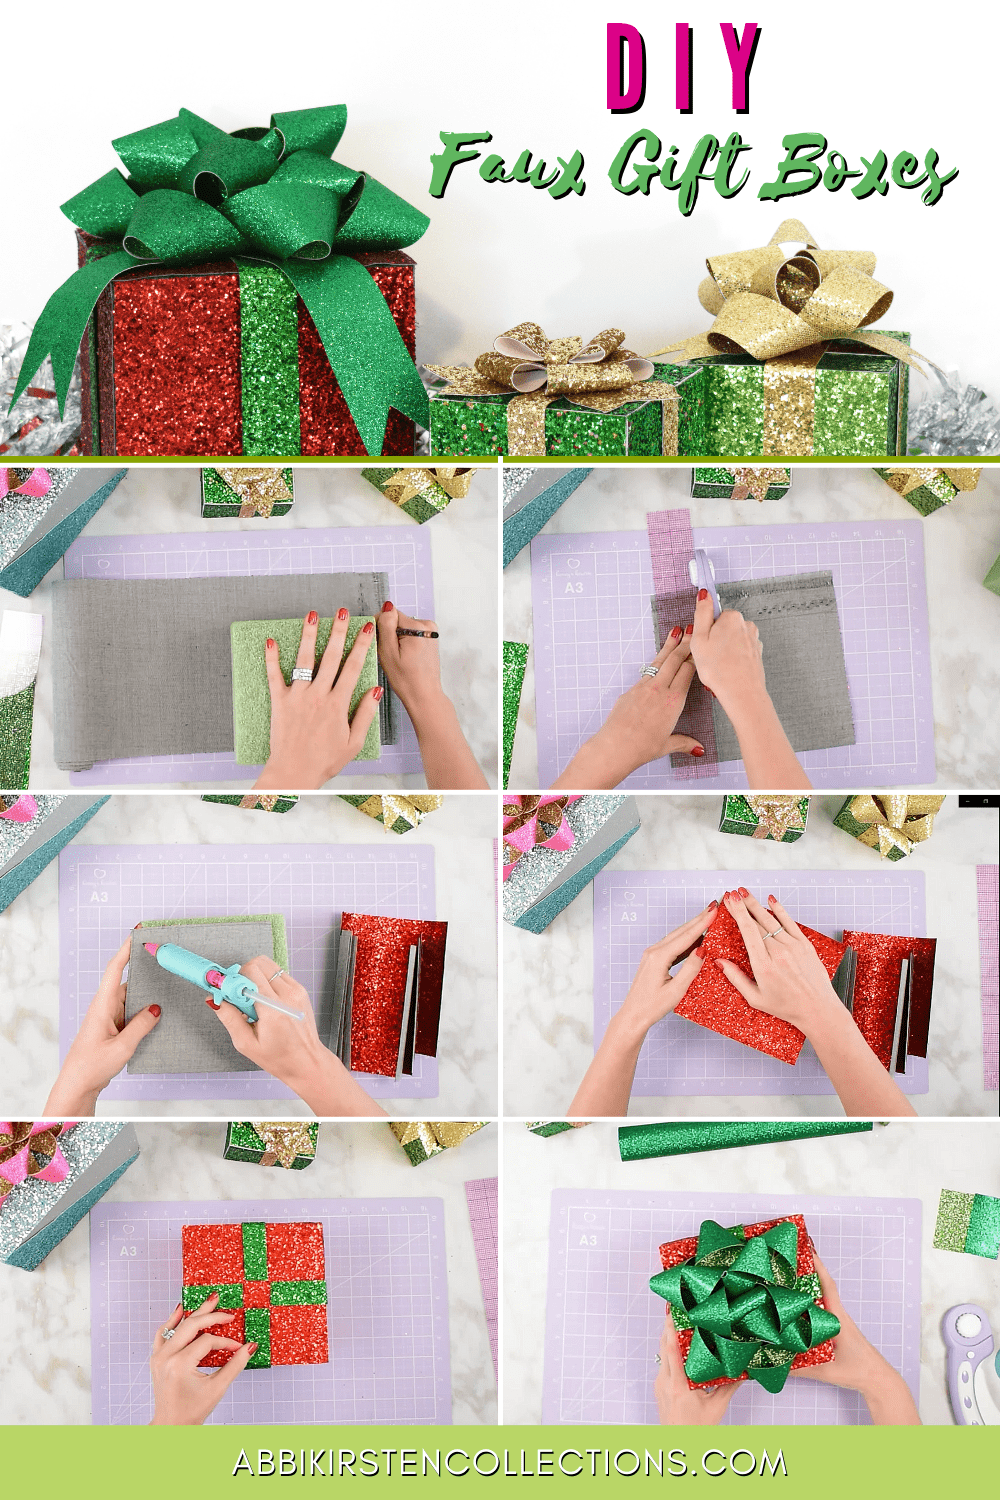 A collage of images shows the step by step process of making decorative glittery gift boxes for Christmas decor.